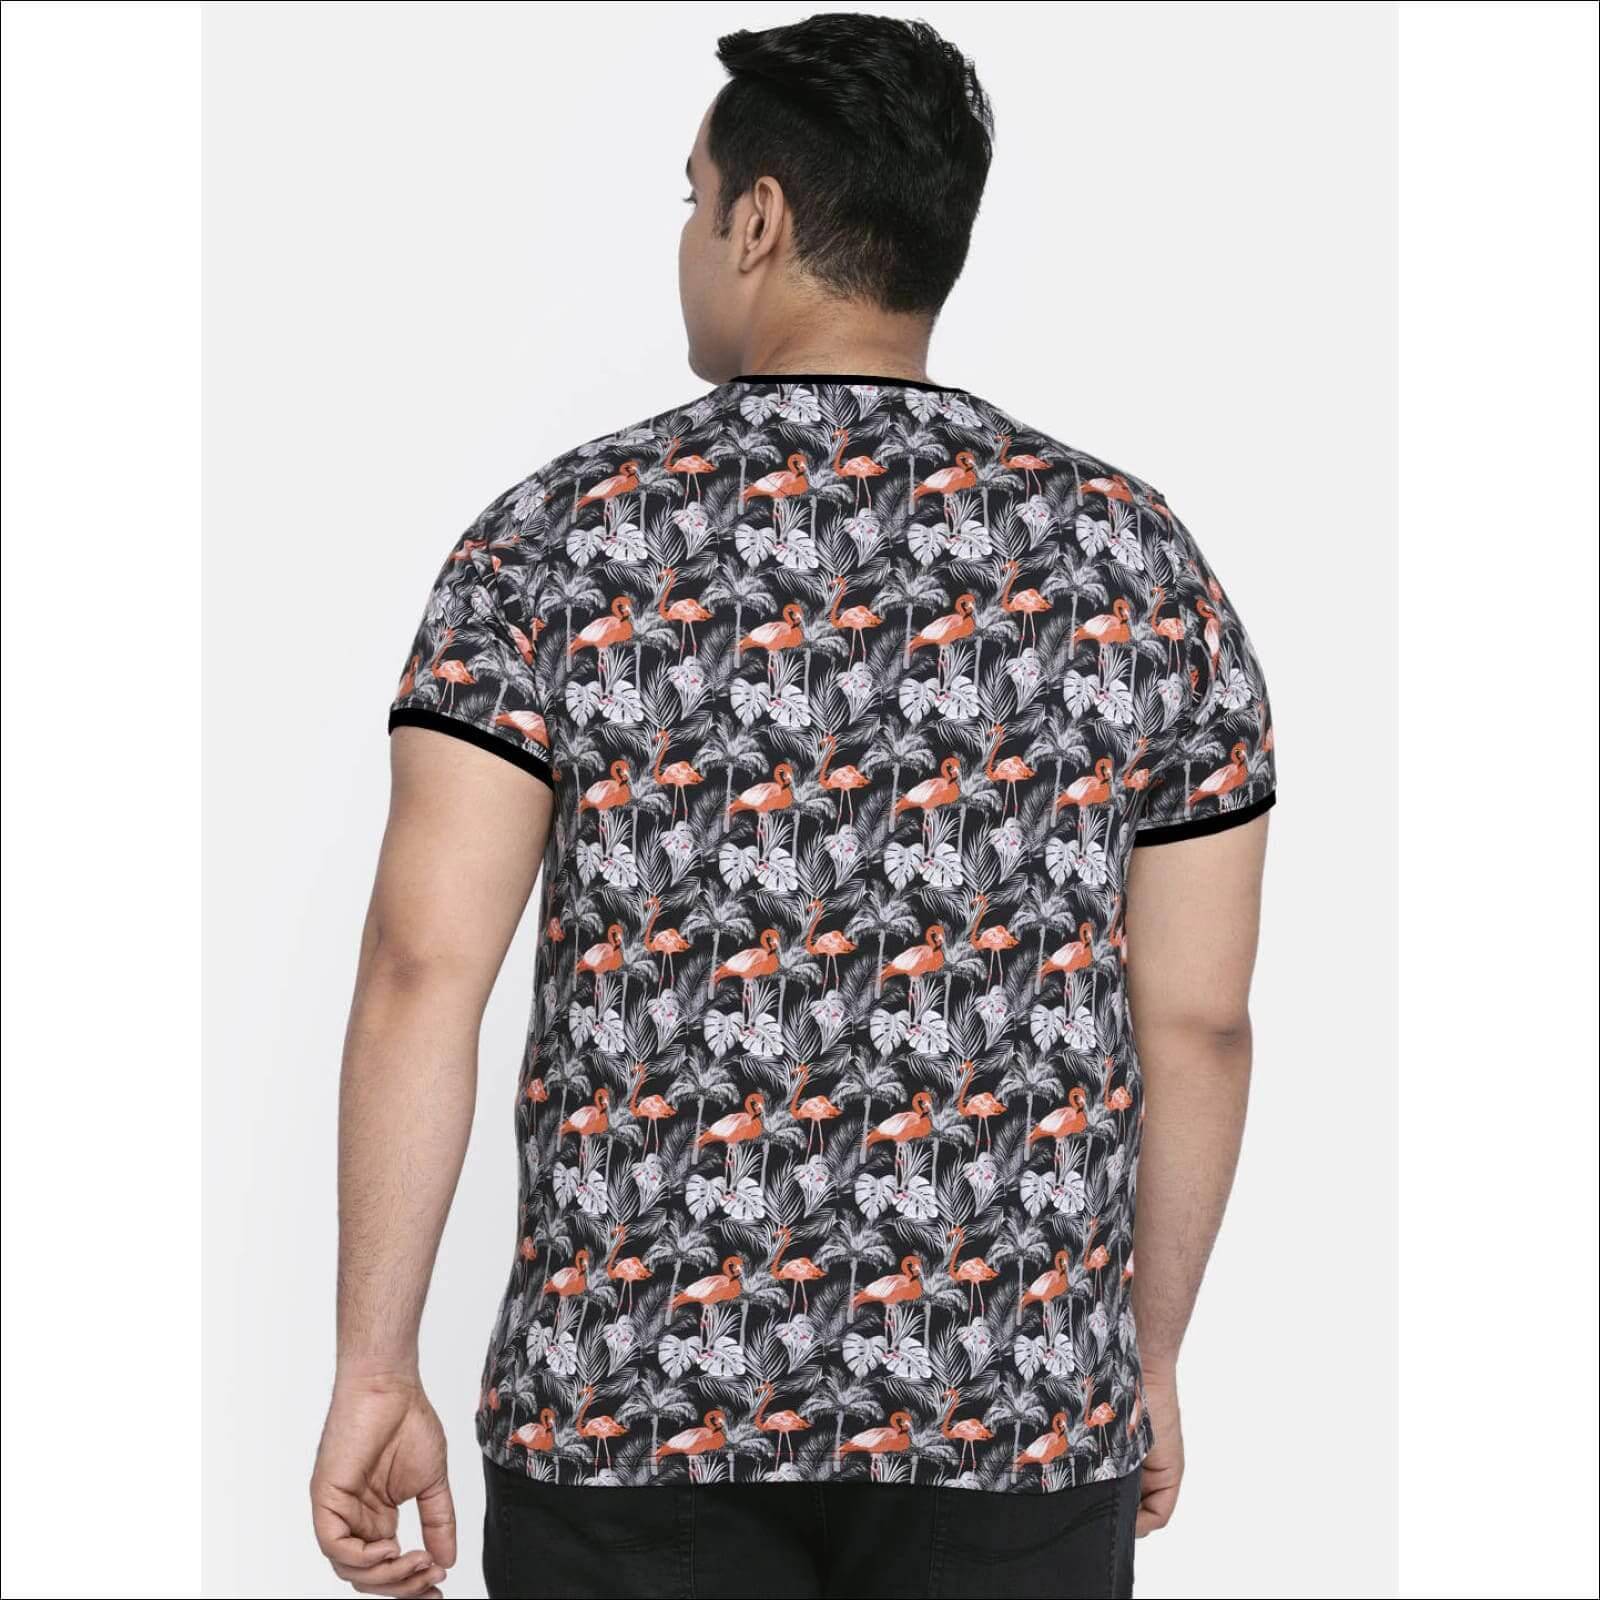 Men's Lycra Digitel Printed Short Sleeve T-Shirts - UD FABRIC - Your Style our Design